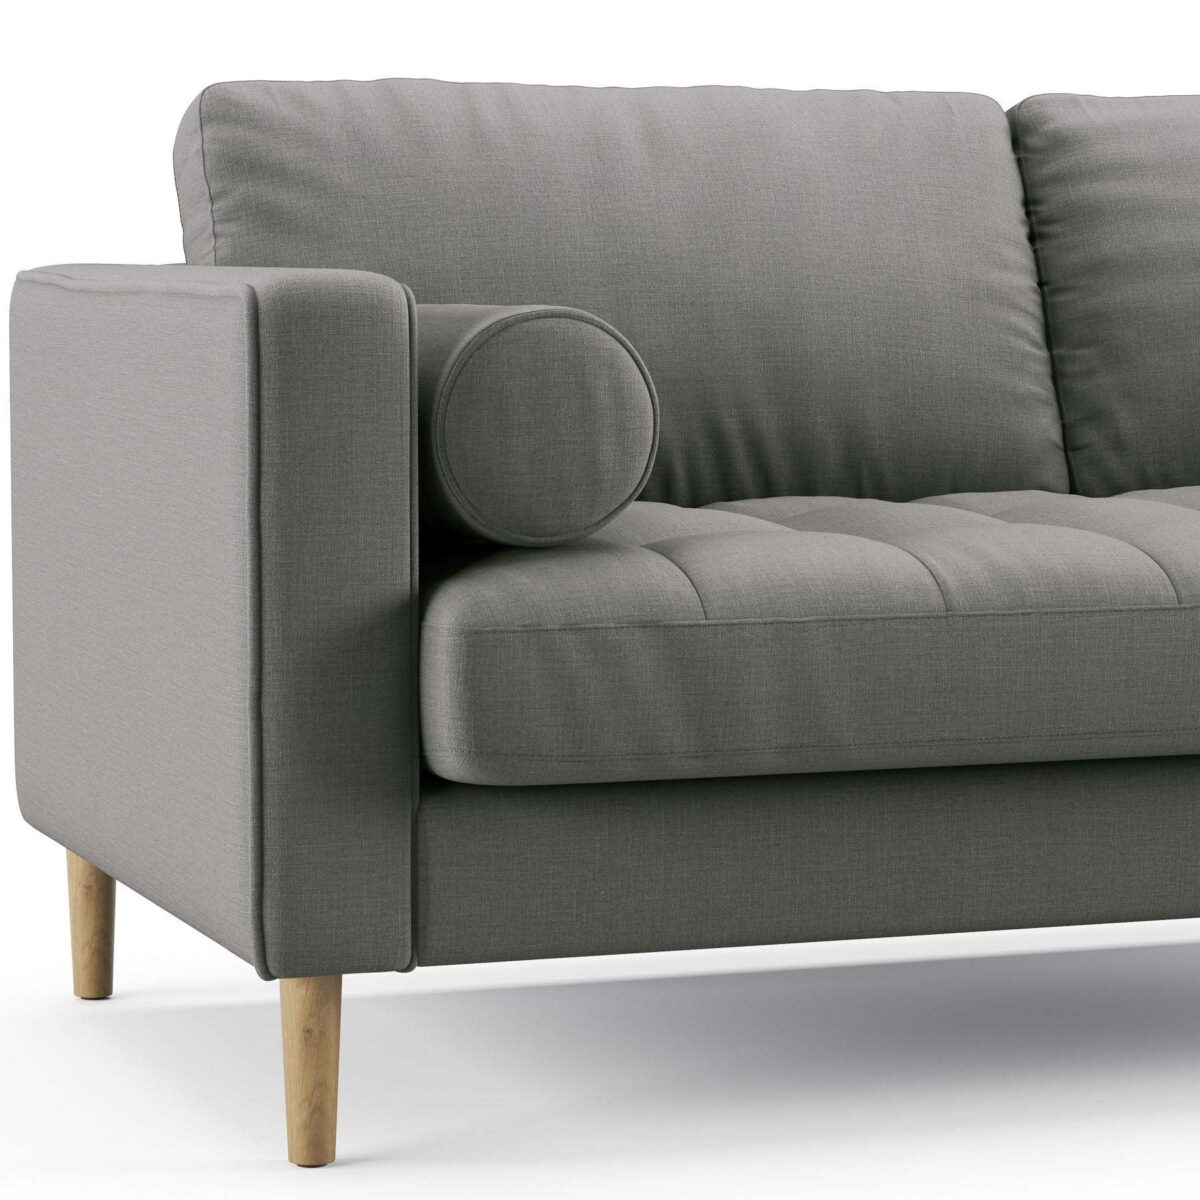 City Chic: Urban Escape with a Trendy 2-Seater Sofa